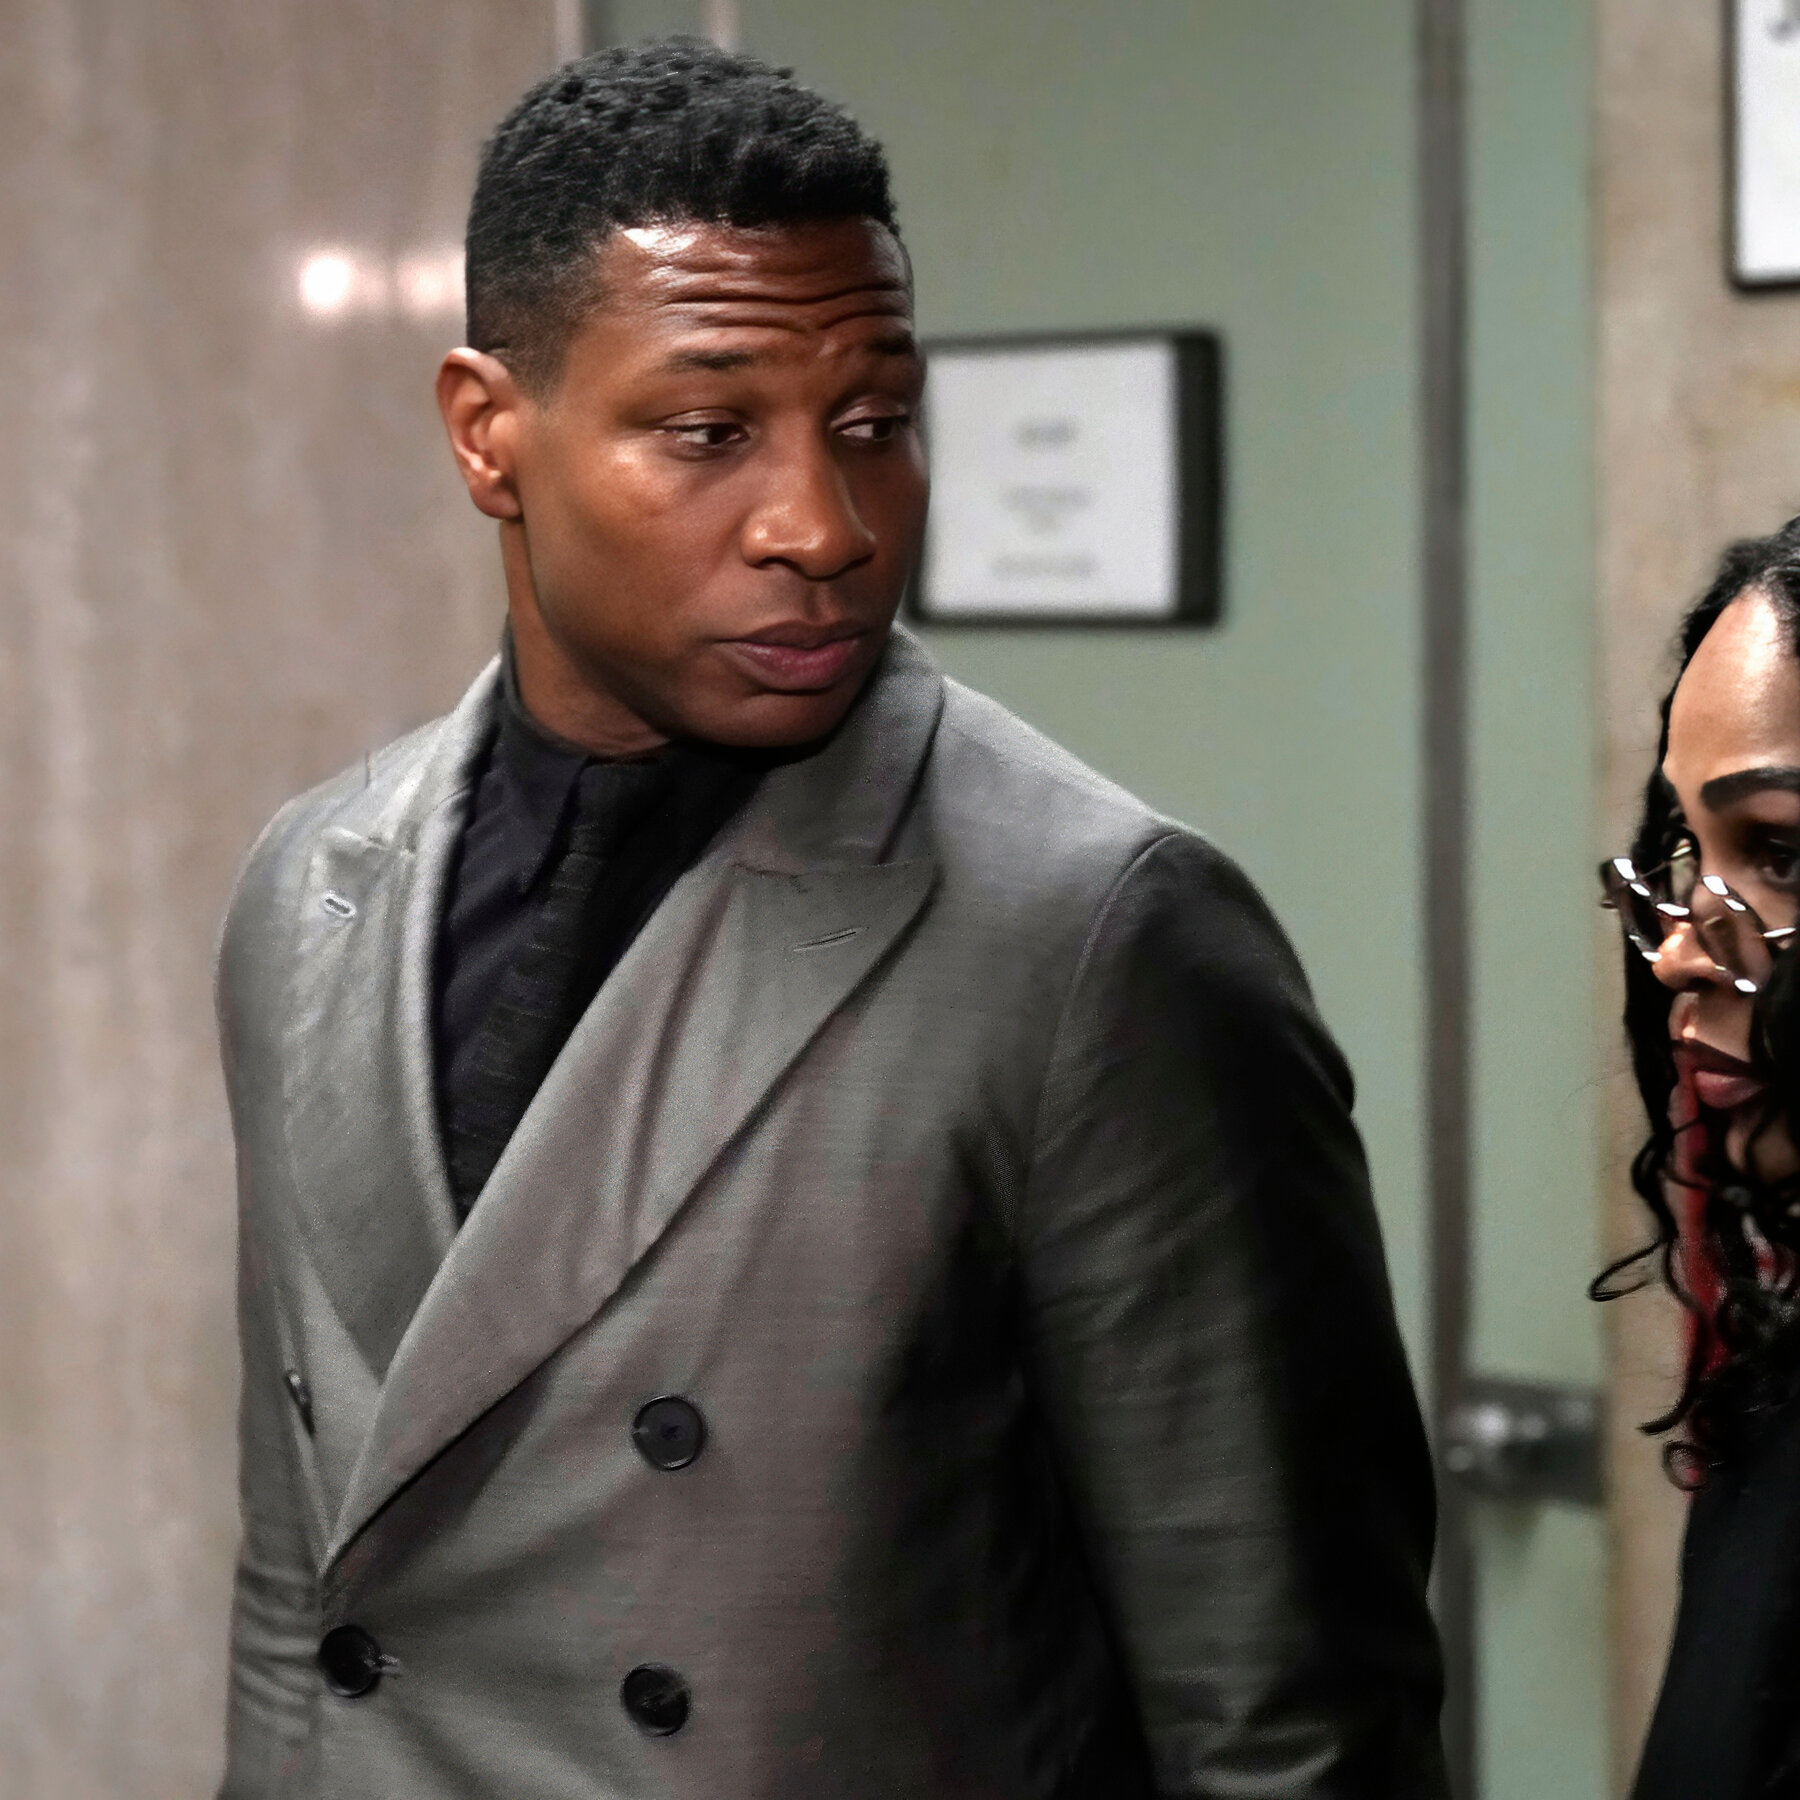 Jonathan Majors Says He Was ‘Shocked’ by Assault Conviction